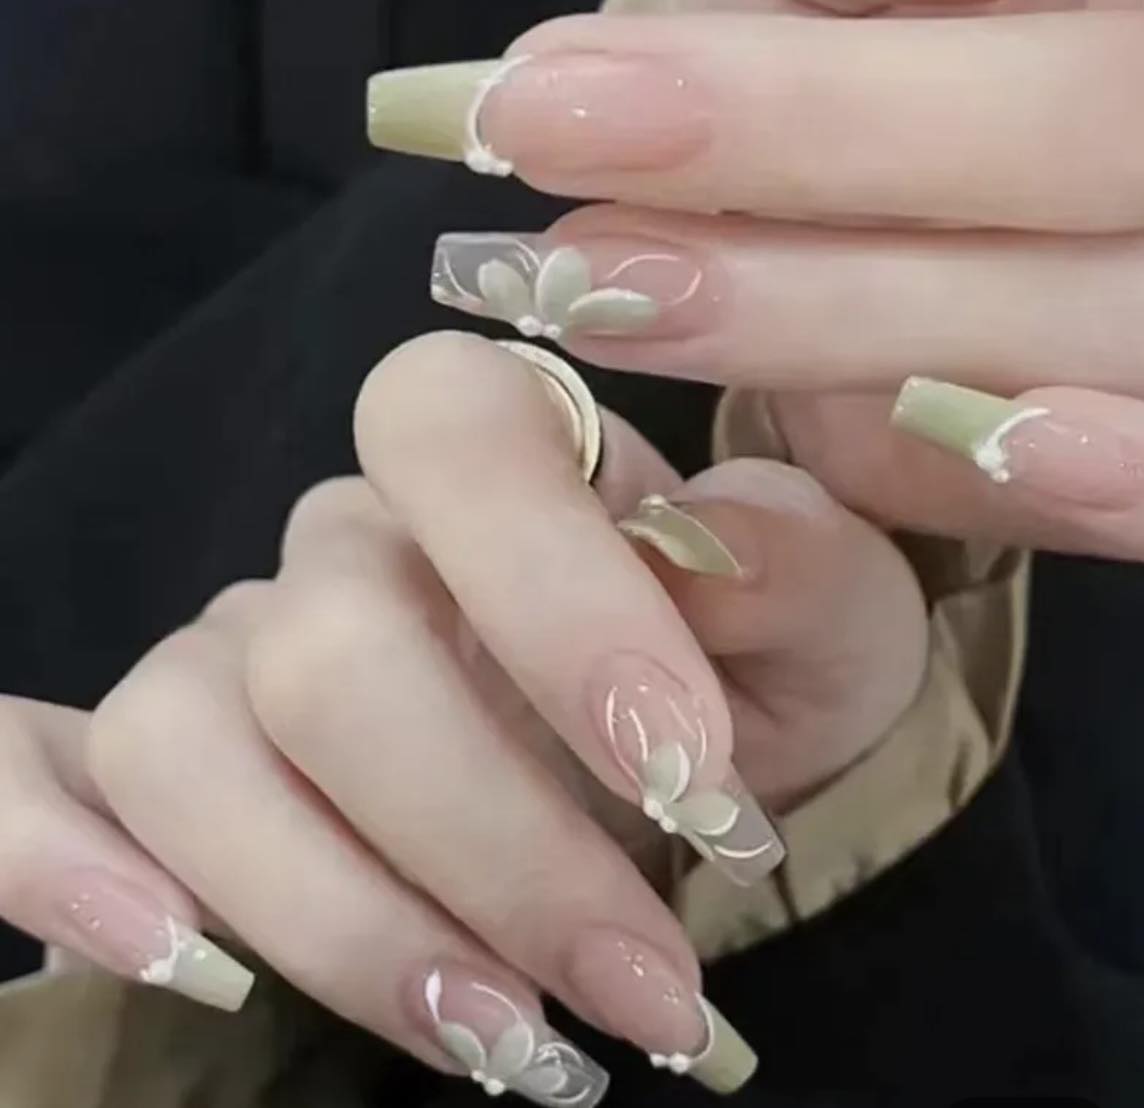 Long Coffin Press on Nails. Pink with Green Tips & Flowers. Easy and quick to apply. Great for those special occasions, parties or add an edge to any outfit. Gorgeous, flattering and you can re-use them again and again.